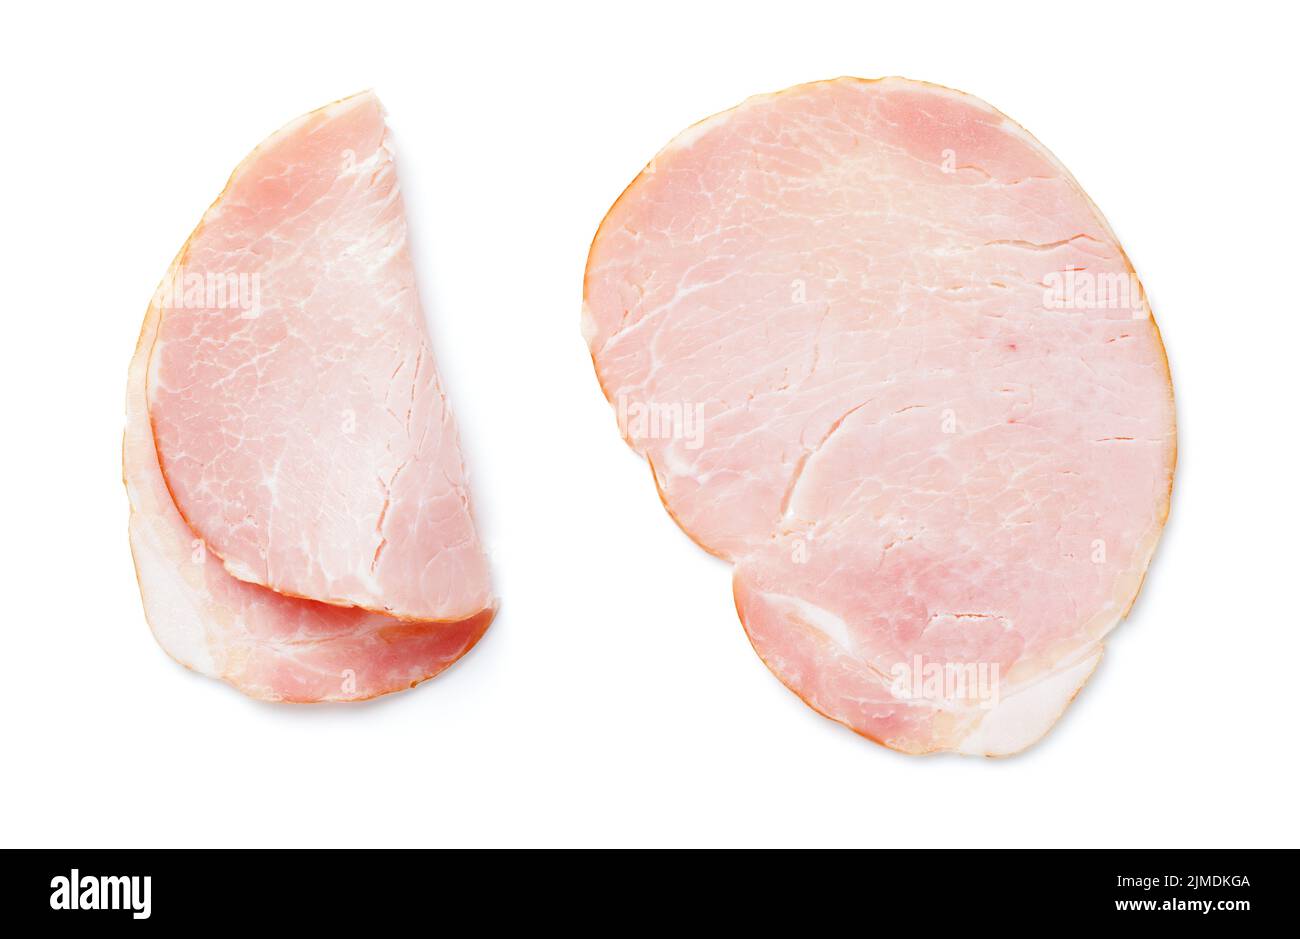 Sliced Smoked Pork Loin Isolated On White Stock Photo